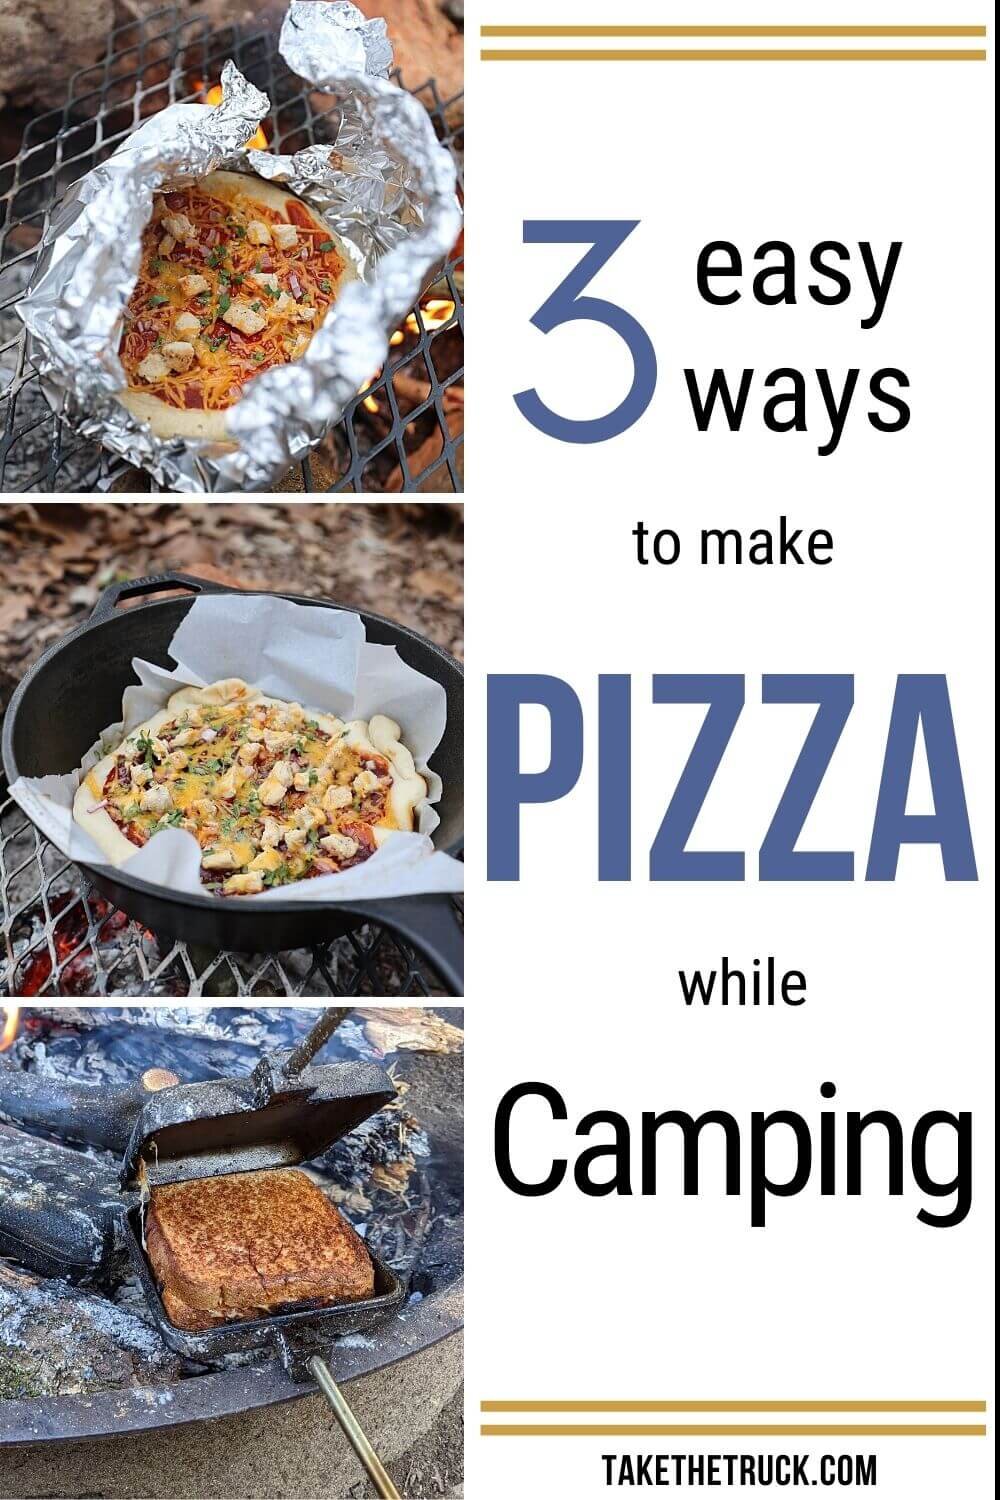 Want pizza while camping? Here’s three easy options for enjoying camping pizza: dutch oven pizza in a cast iron skillet, melty campfire pizza, and pie iron pizza (aka pudgy pie pizza). 